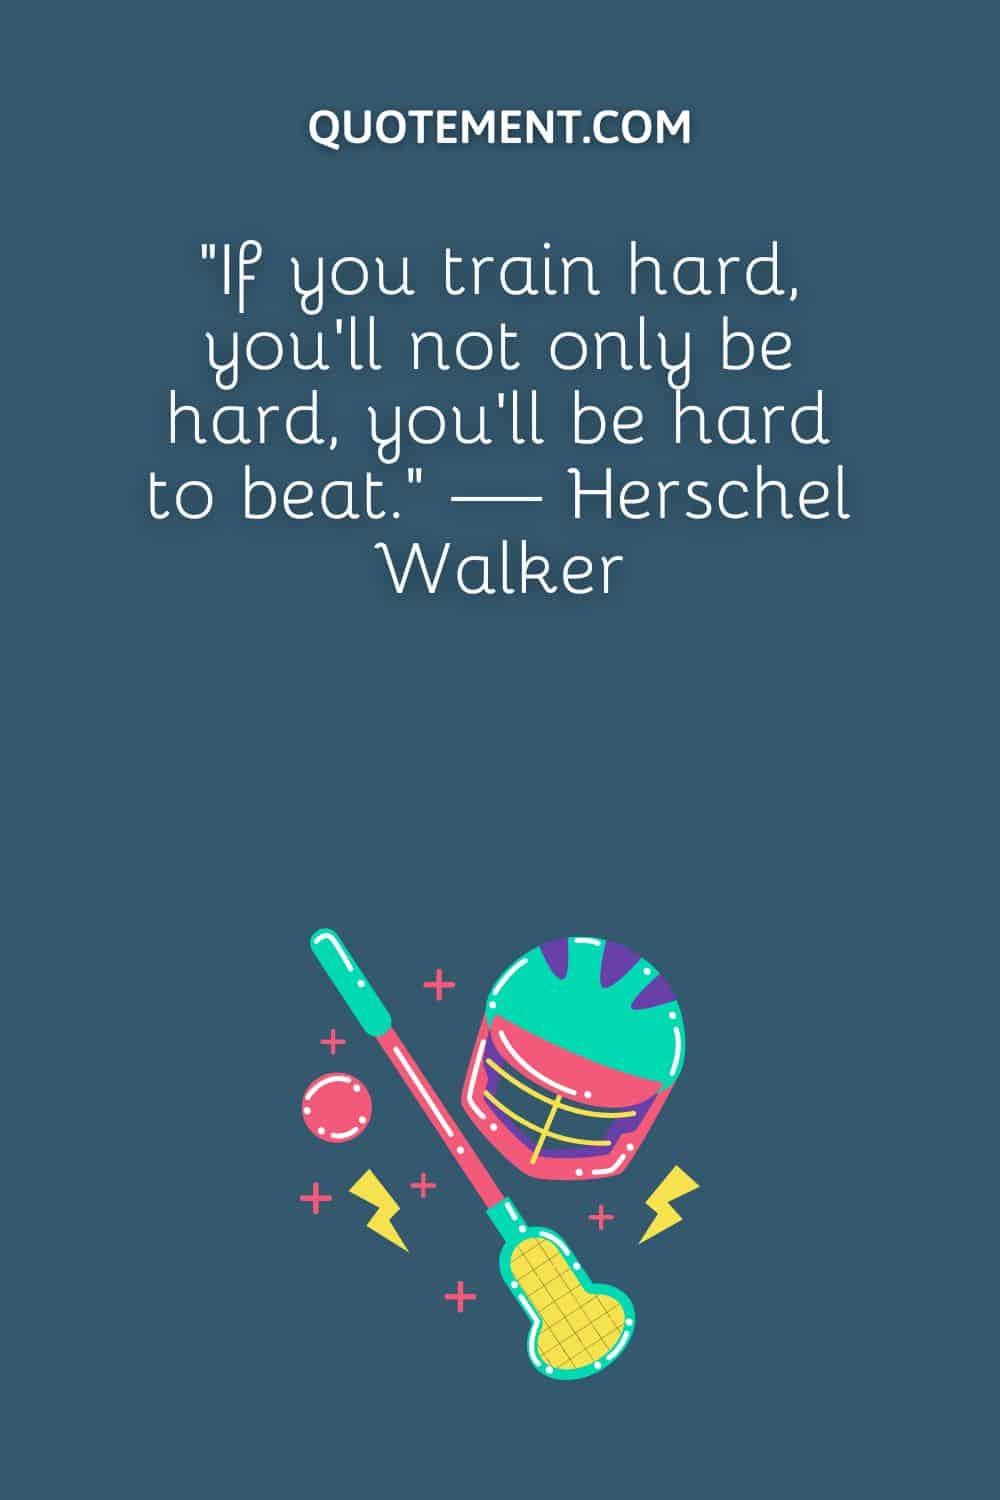 “If you train hard, you’ll not only be hard, you’ll be hard to beat.” — Herschel Walker